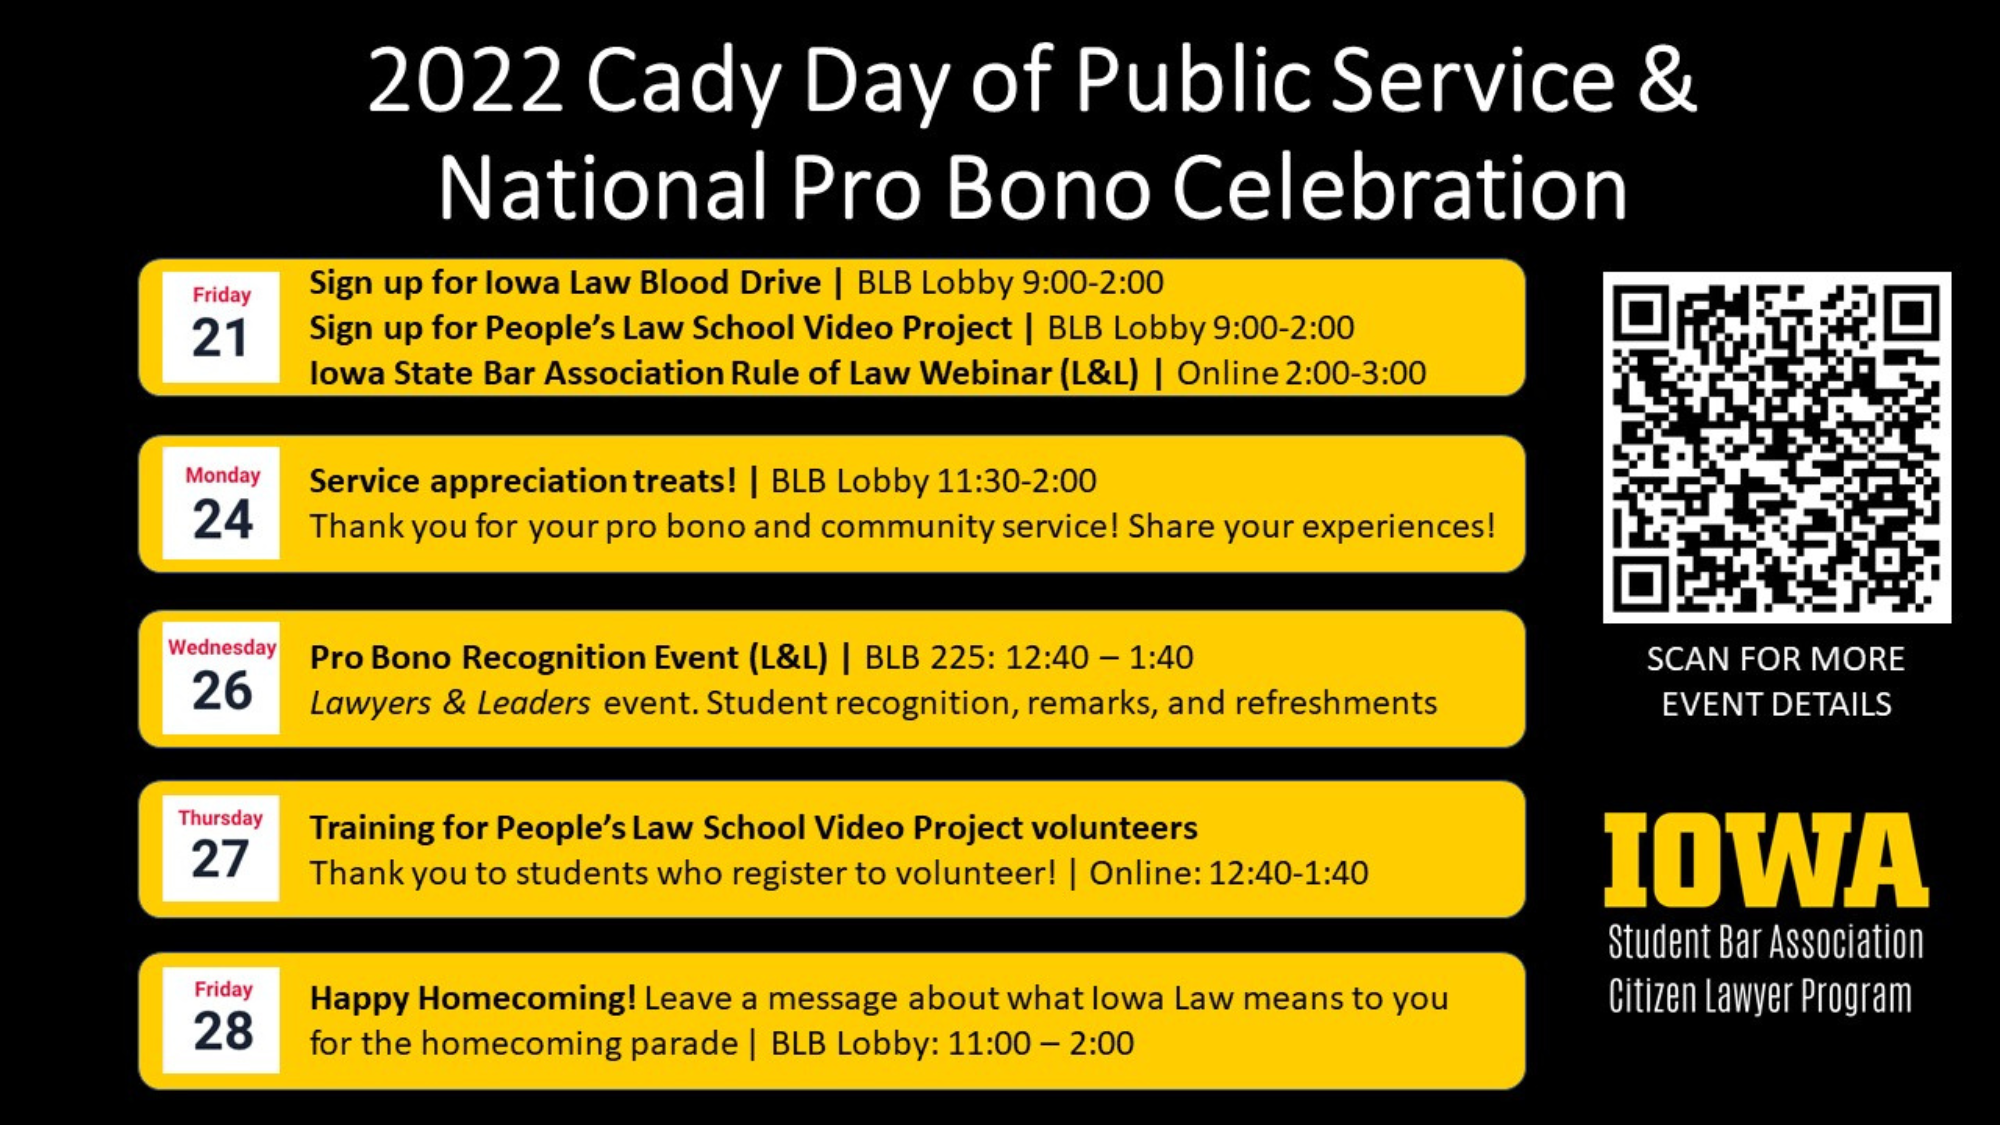  2022 Cady Day of Public Service & National Pro Bono Celebration    Sign up for Iowa Law Blood Drive | BLB Lobby 9:00-2:00    Sign up for People’s Law School Video Project | BLB Lobby 9:00-2:00    Iowa State Bar Association Rule of Law Webinar (L&L) | Online 2:00-3:00    Service appreciation treats! | BLB Lobby 11:30-2:00    Thank you for your pro bono and community service! Share your experiences!    Pro Bono Recognition Event (L&L) | BLB 225: 12:40 – 1:40     Lawyers & Leaders event. Student recognition, remarks, and refreshments    Training for People’s Law School Video Project volunteers     Thank you to students who register to volunteer! | Online: 12:40-1:40    Happy Homecoming! Leave a message about what Iowa Law means to you     for the homecoming parade | BLB Lobby: 11:00 – 2:00